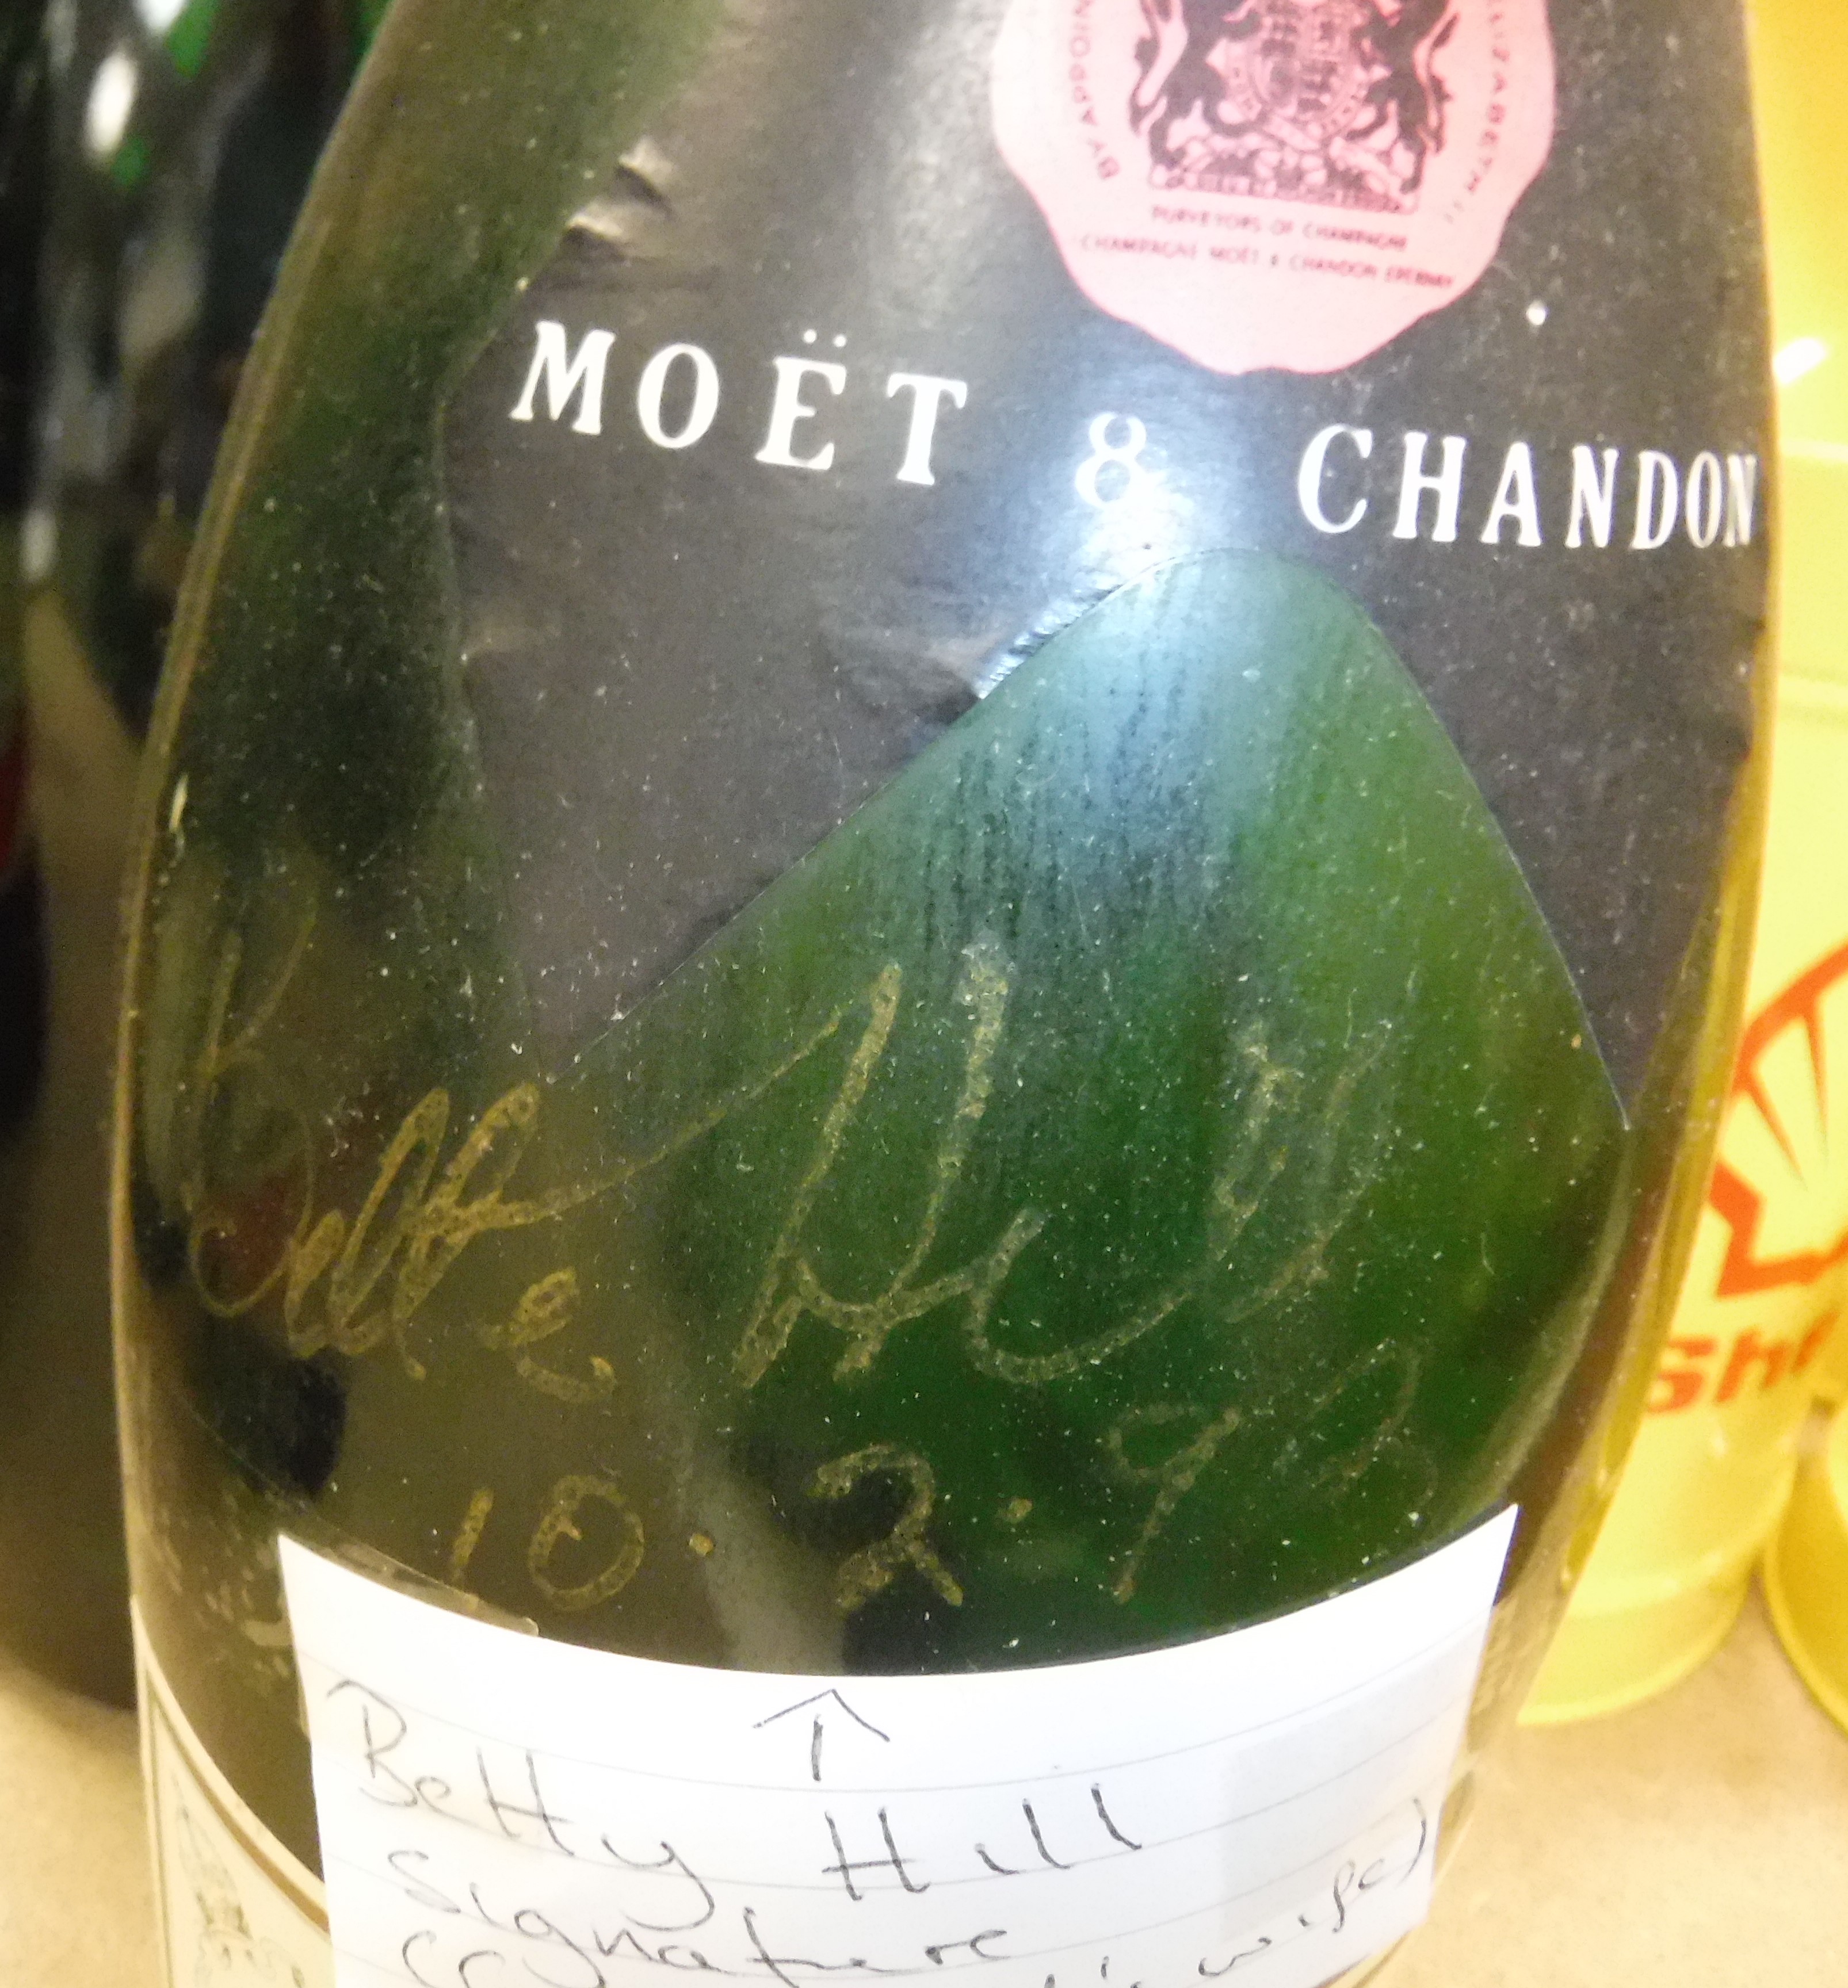 A collection of various vintage Champagne / wine bottles including a Moet et Chandon signed by - Image 3 of 5